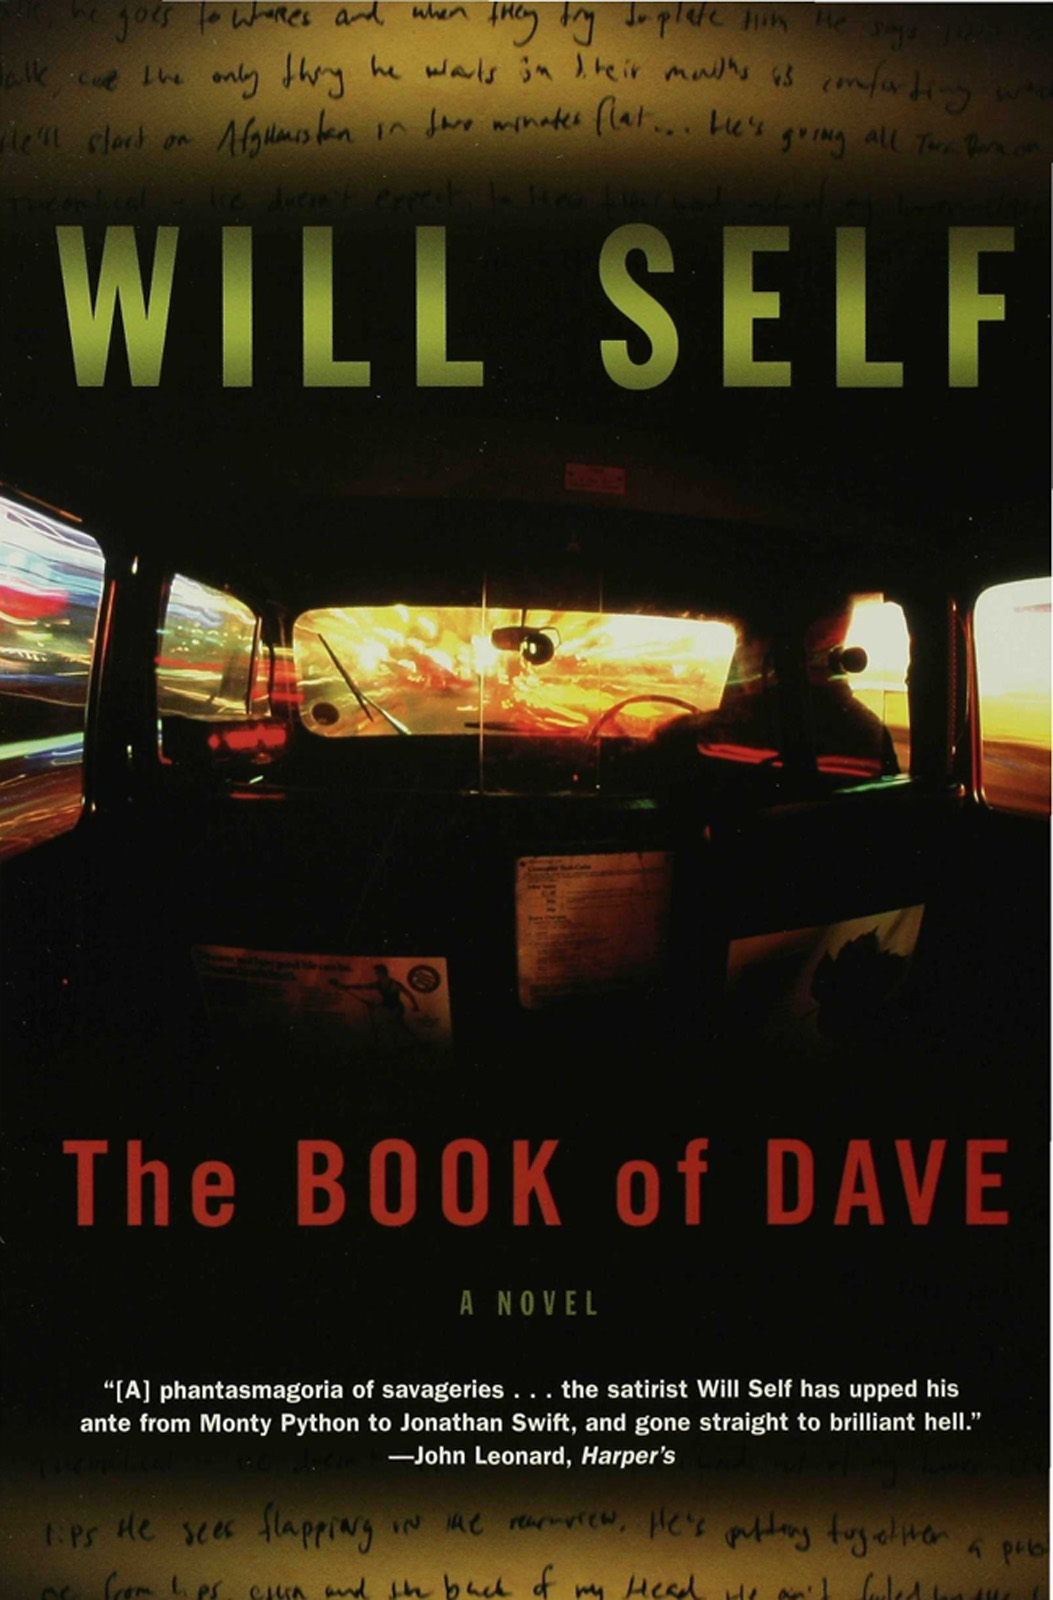 The Book of Dave (2009) by Will Self